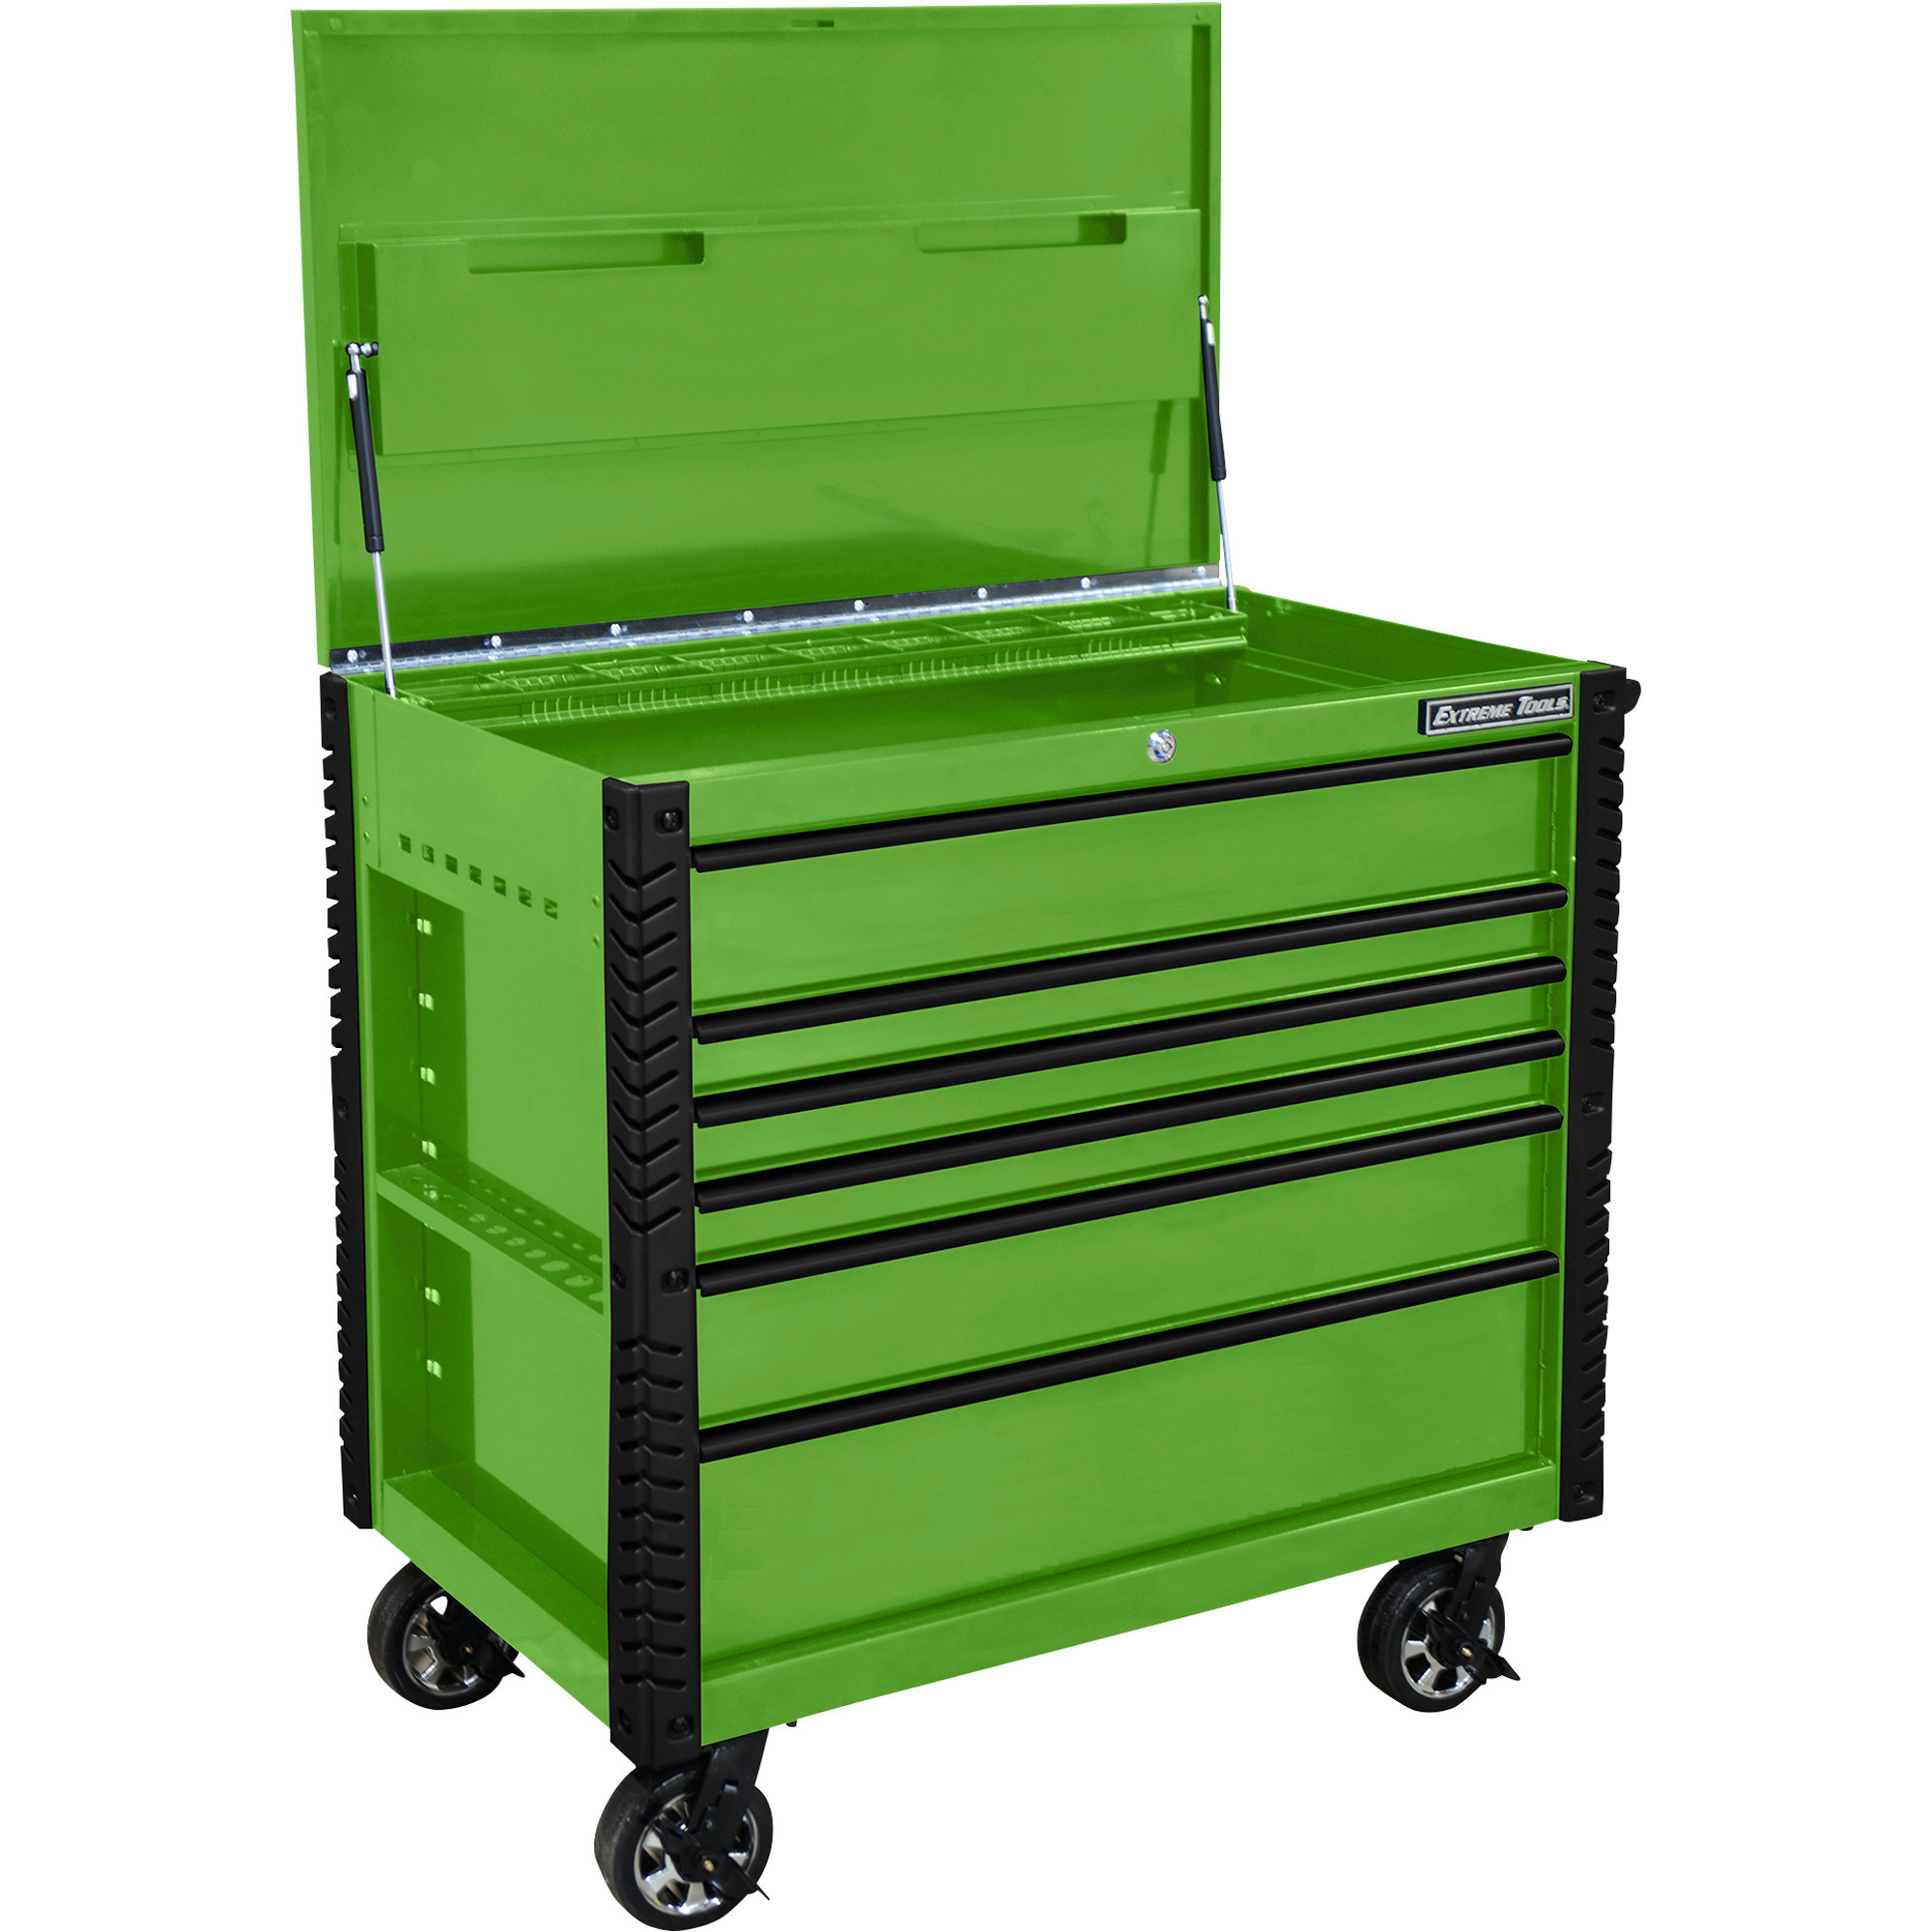 Extreme Tools EX Professional Series 41Inch 6 Drawer Flip Top Tool Cart — 41.75Inch W x 25.75Inch D x 43Inch H, Green with Black Drawer Pulls, Model -  EX4106TCGNBK